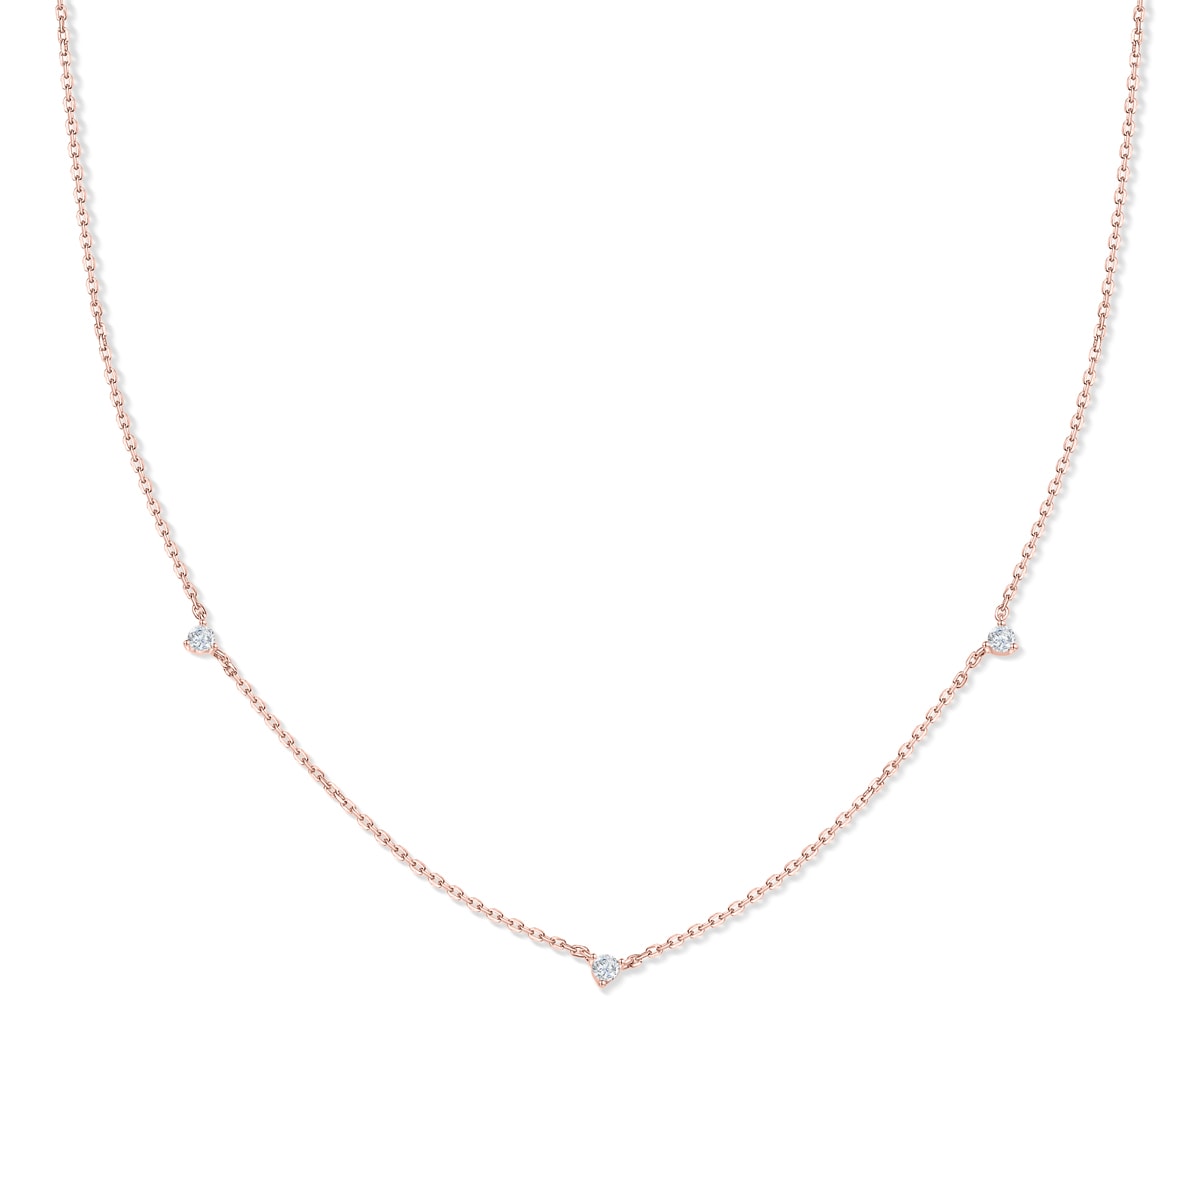 Rose gold cz stone chain necklace 